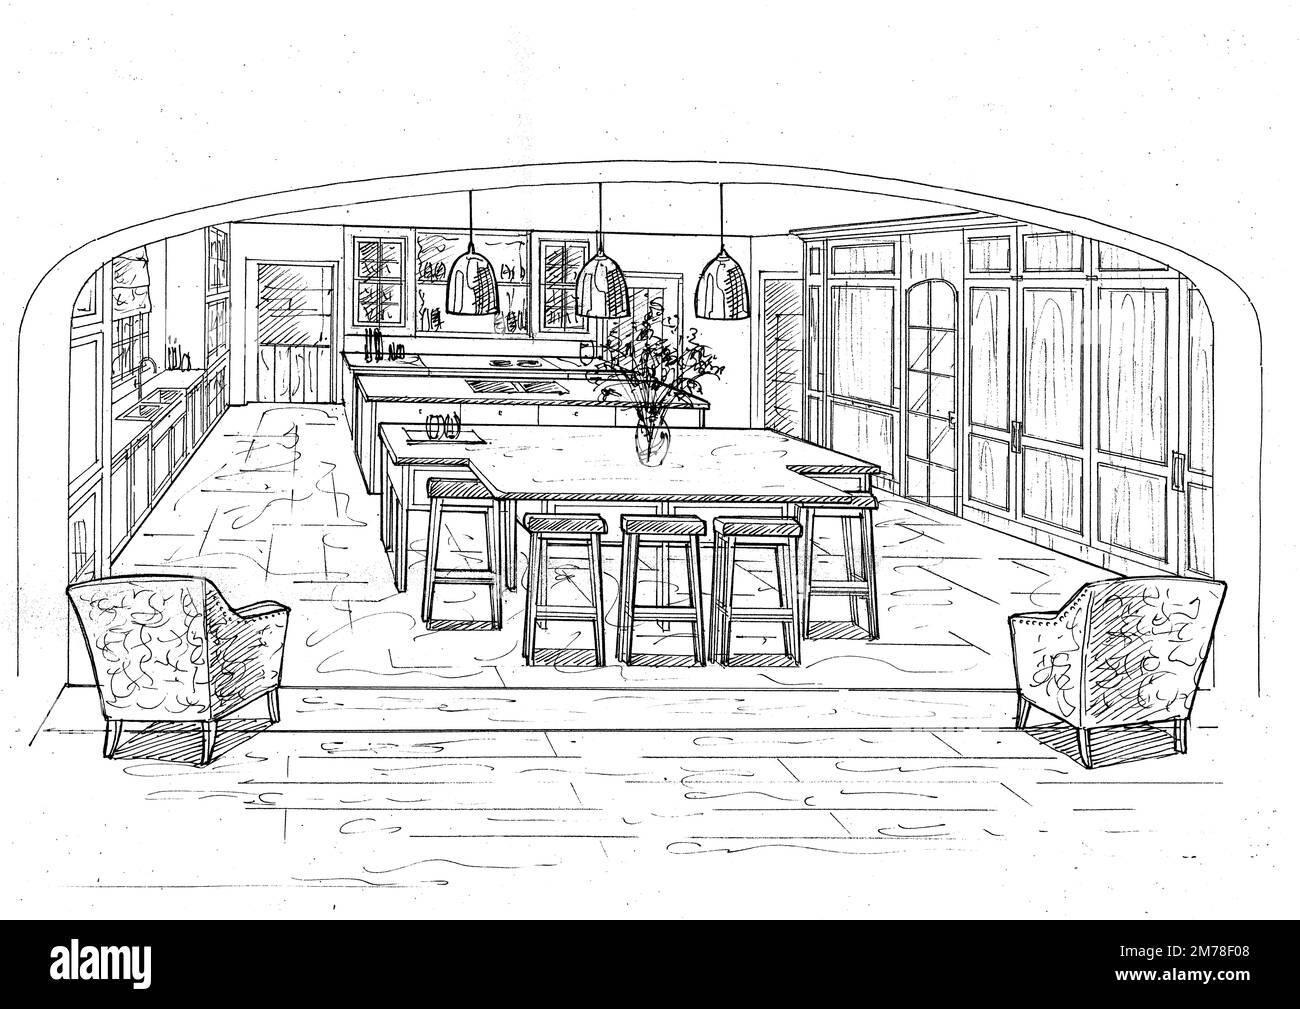 Black and white sketch of a kitchen interior on a white background. Stock Photo